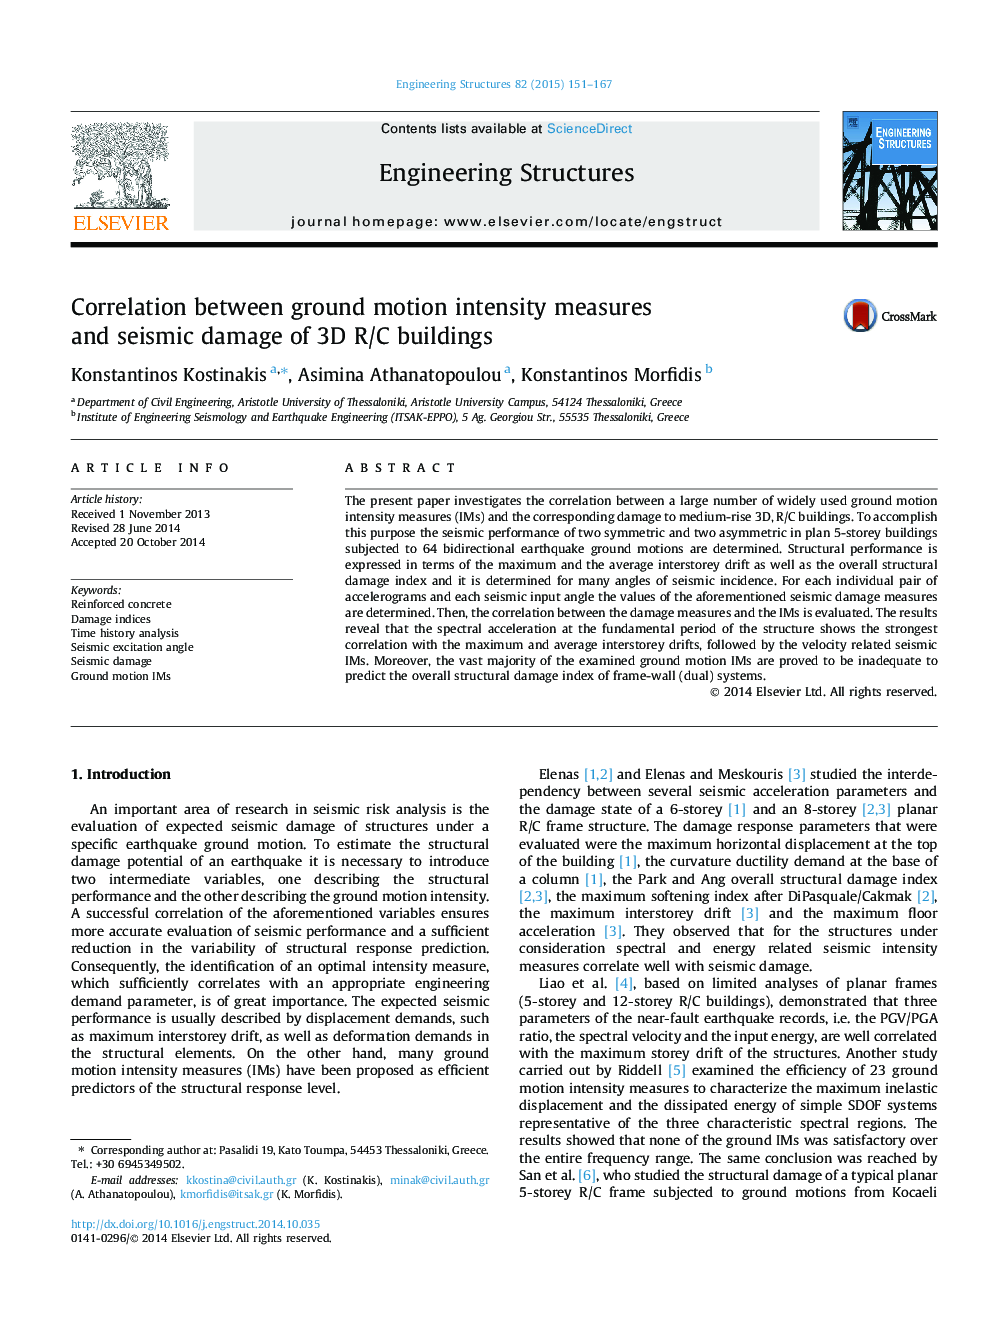 Correlation between ground motion intensity measures and seismic damage of 3D R/C buildings